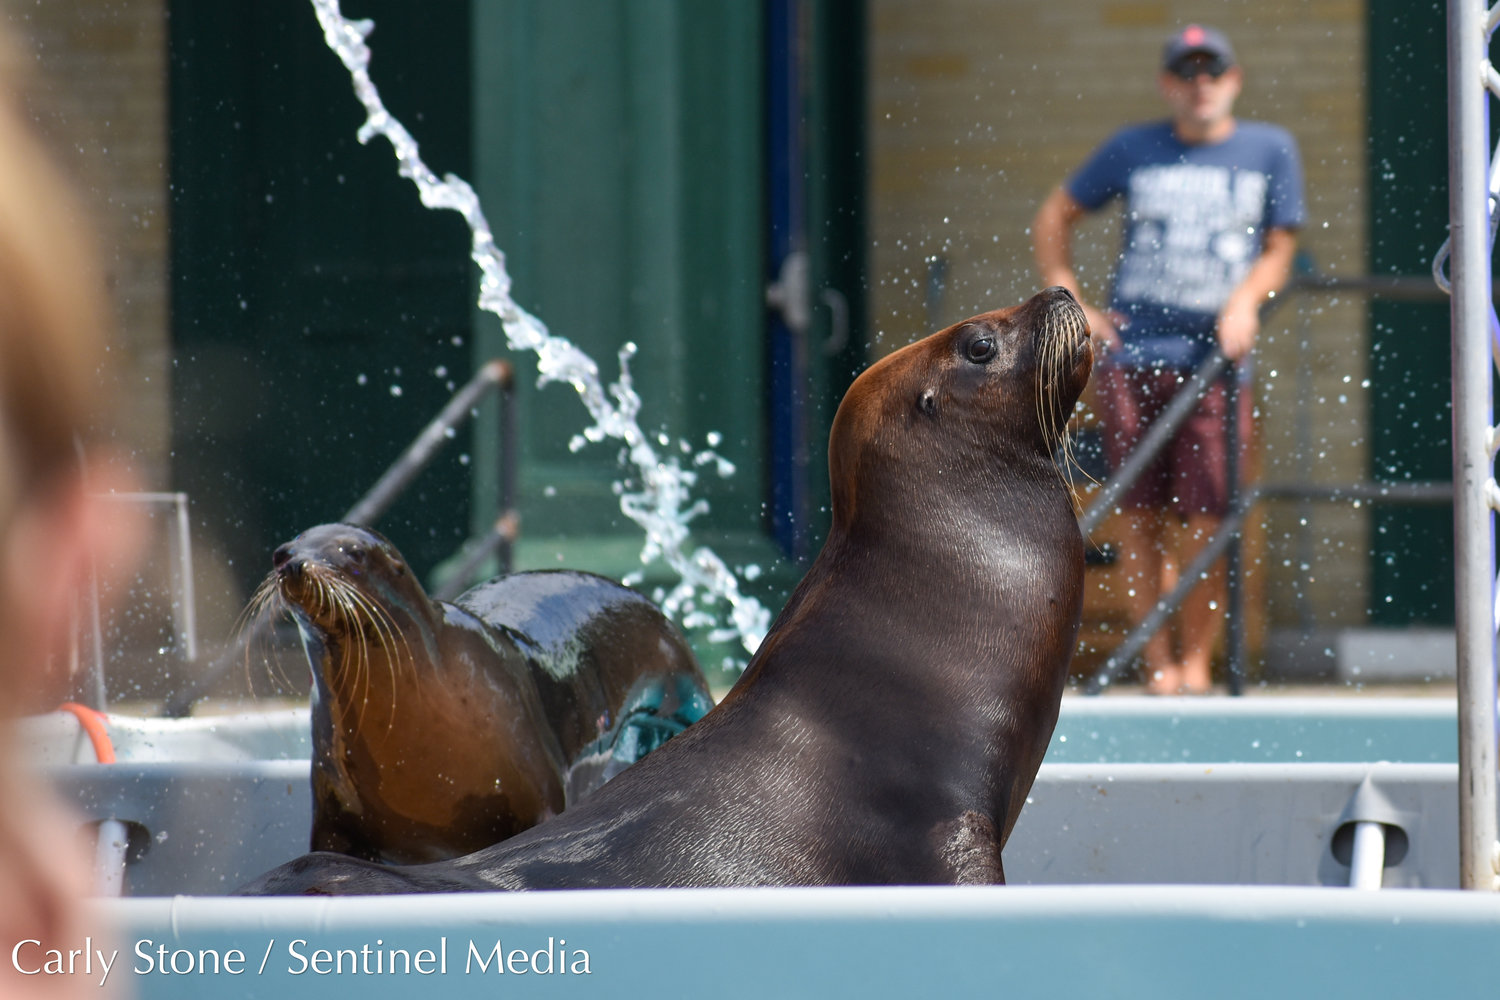 Sea Lion Splash is back this year at the 2022 NYS Fair.